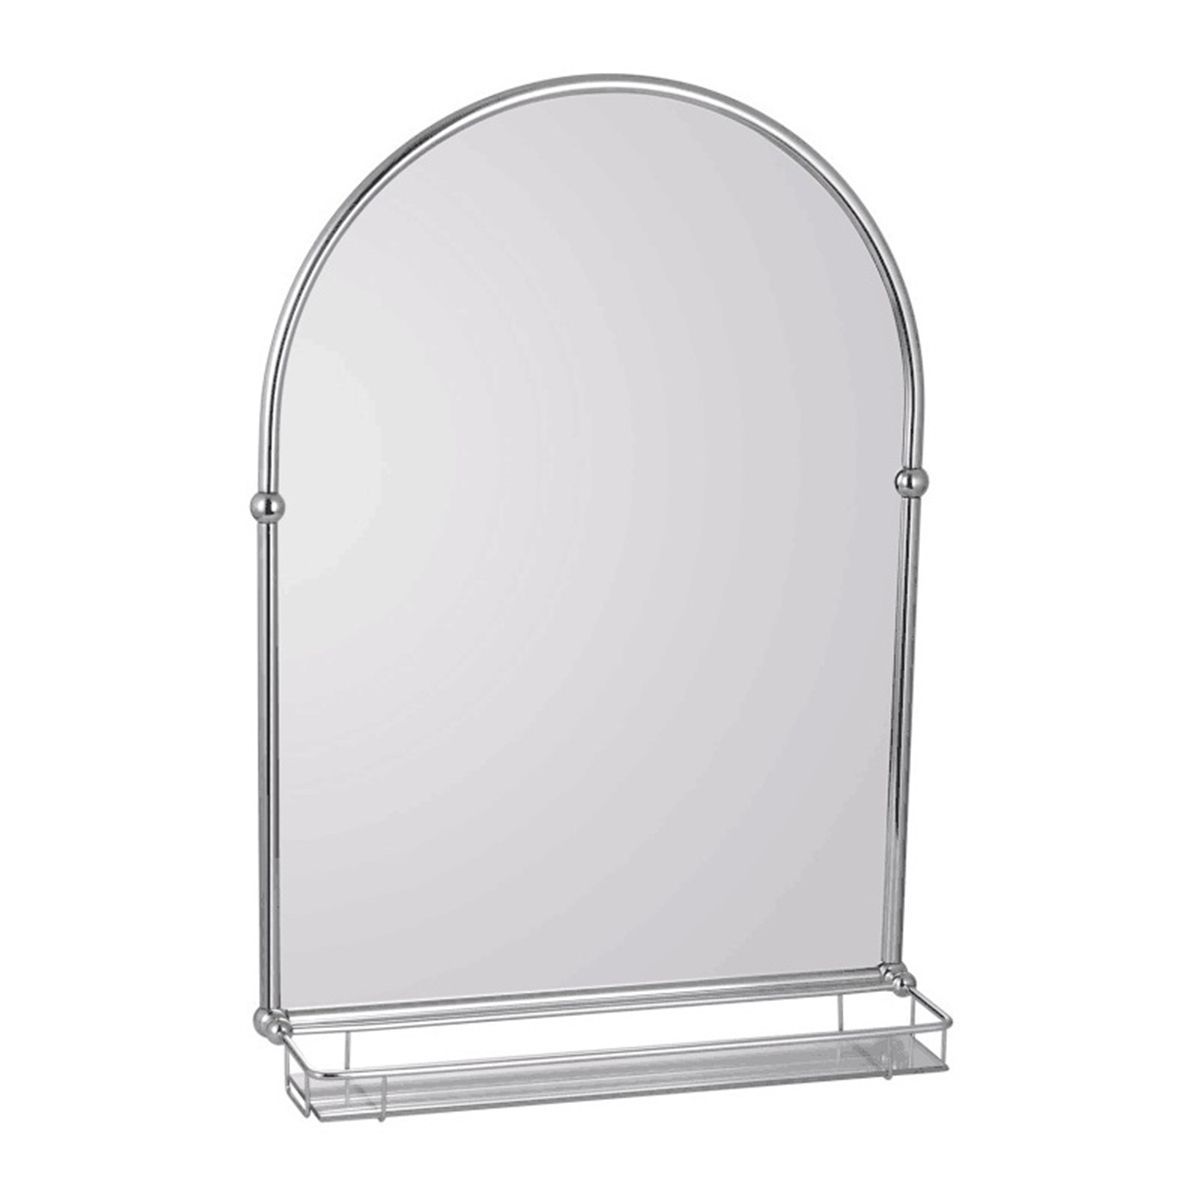 Frontline Holborn Traditional Arched Bathroom Mirror With Shelf For Famous Waved Arch Tall Traditional Wall Mirrors (View 4 of 15)